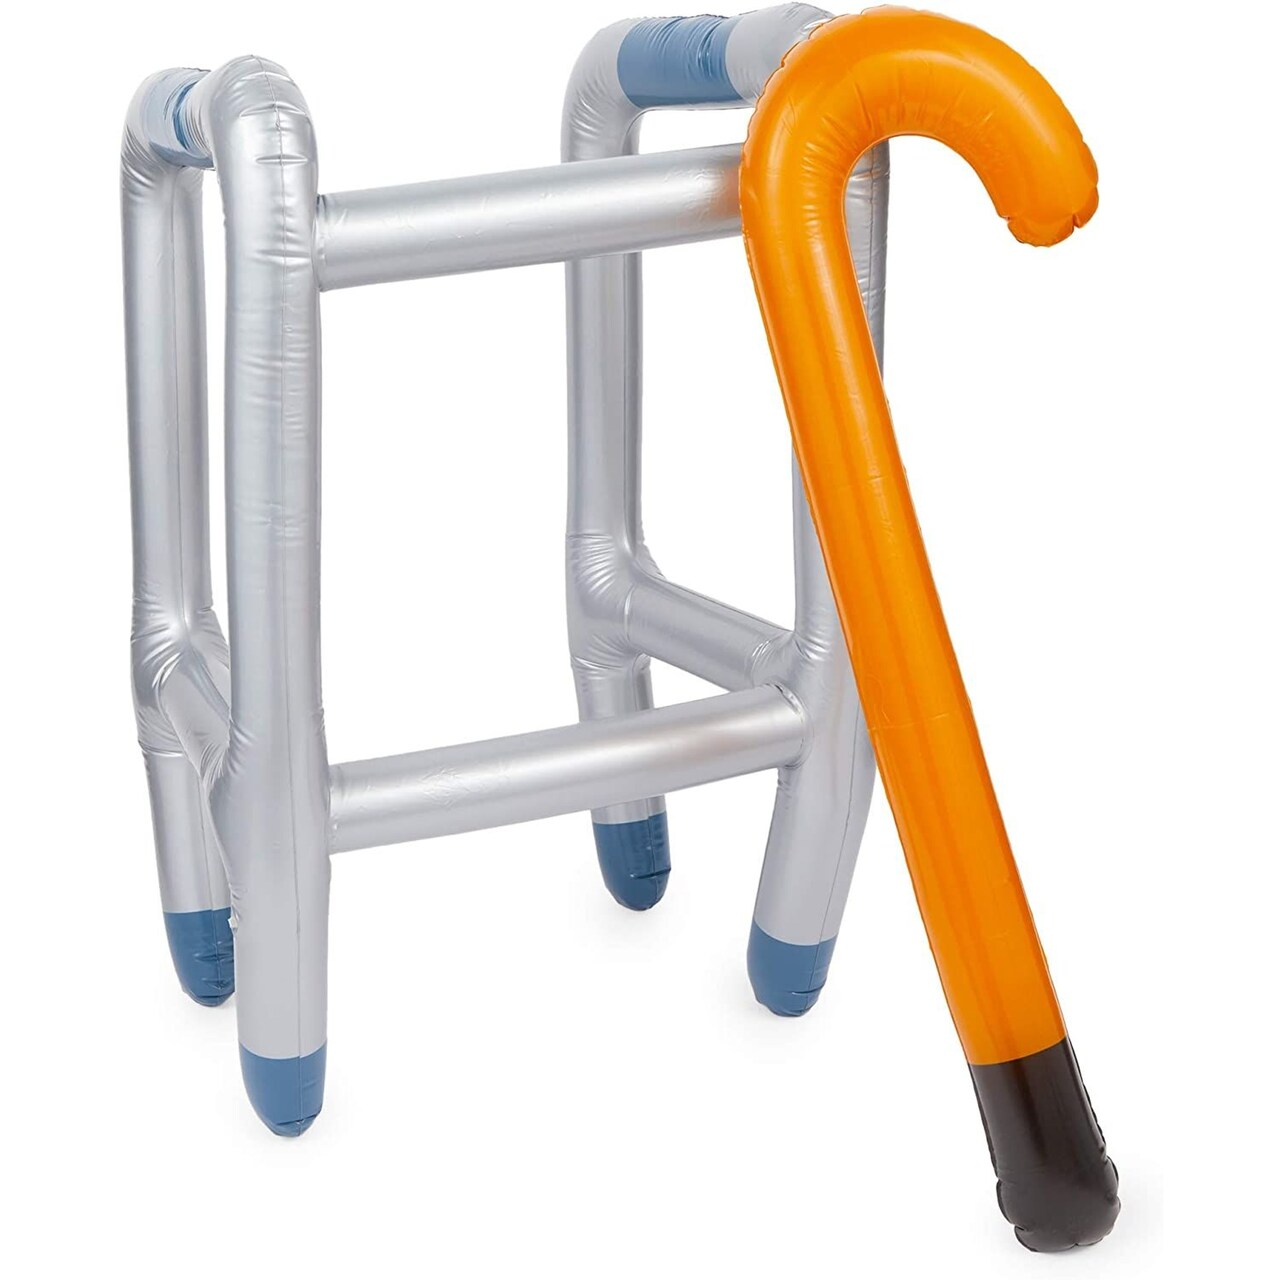 Inflatable Walker and Cane, Over The Hill Gag Gift (2 Pieces)